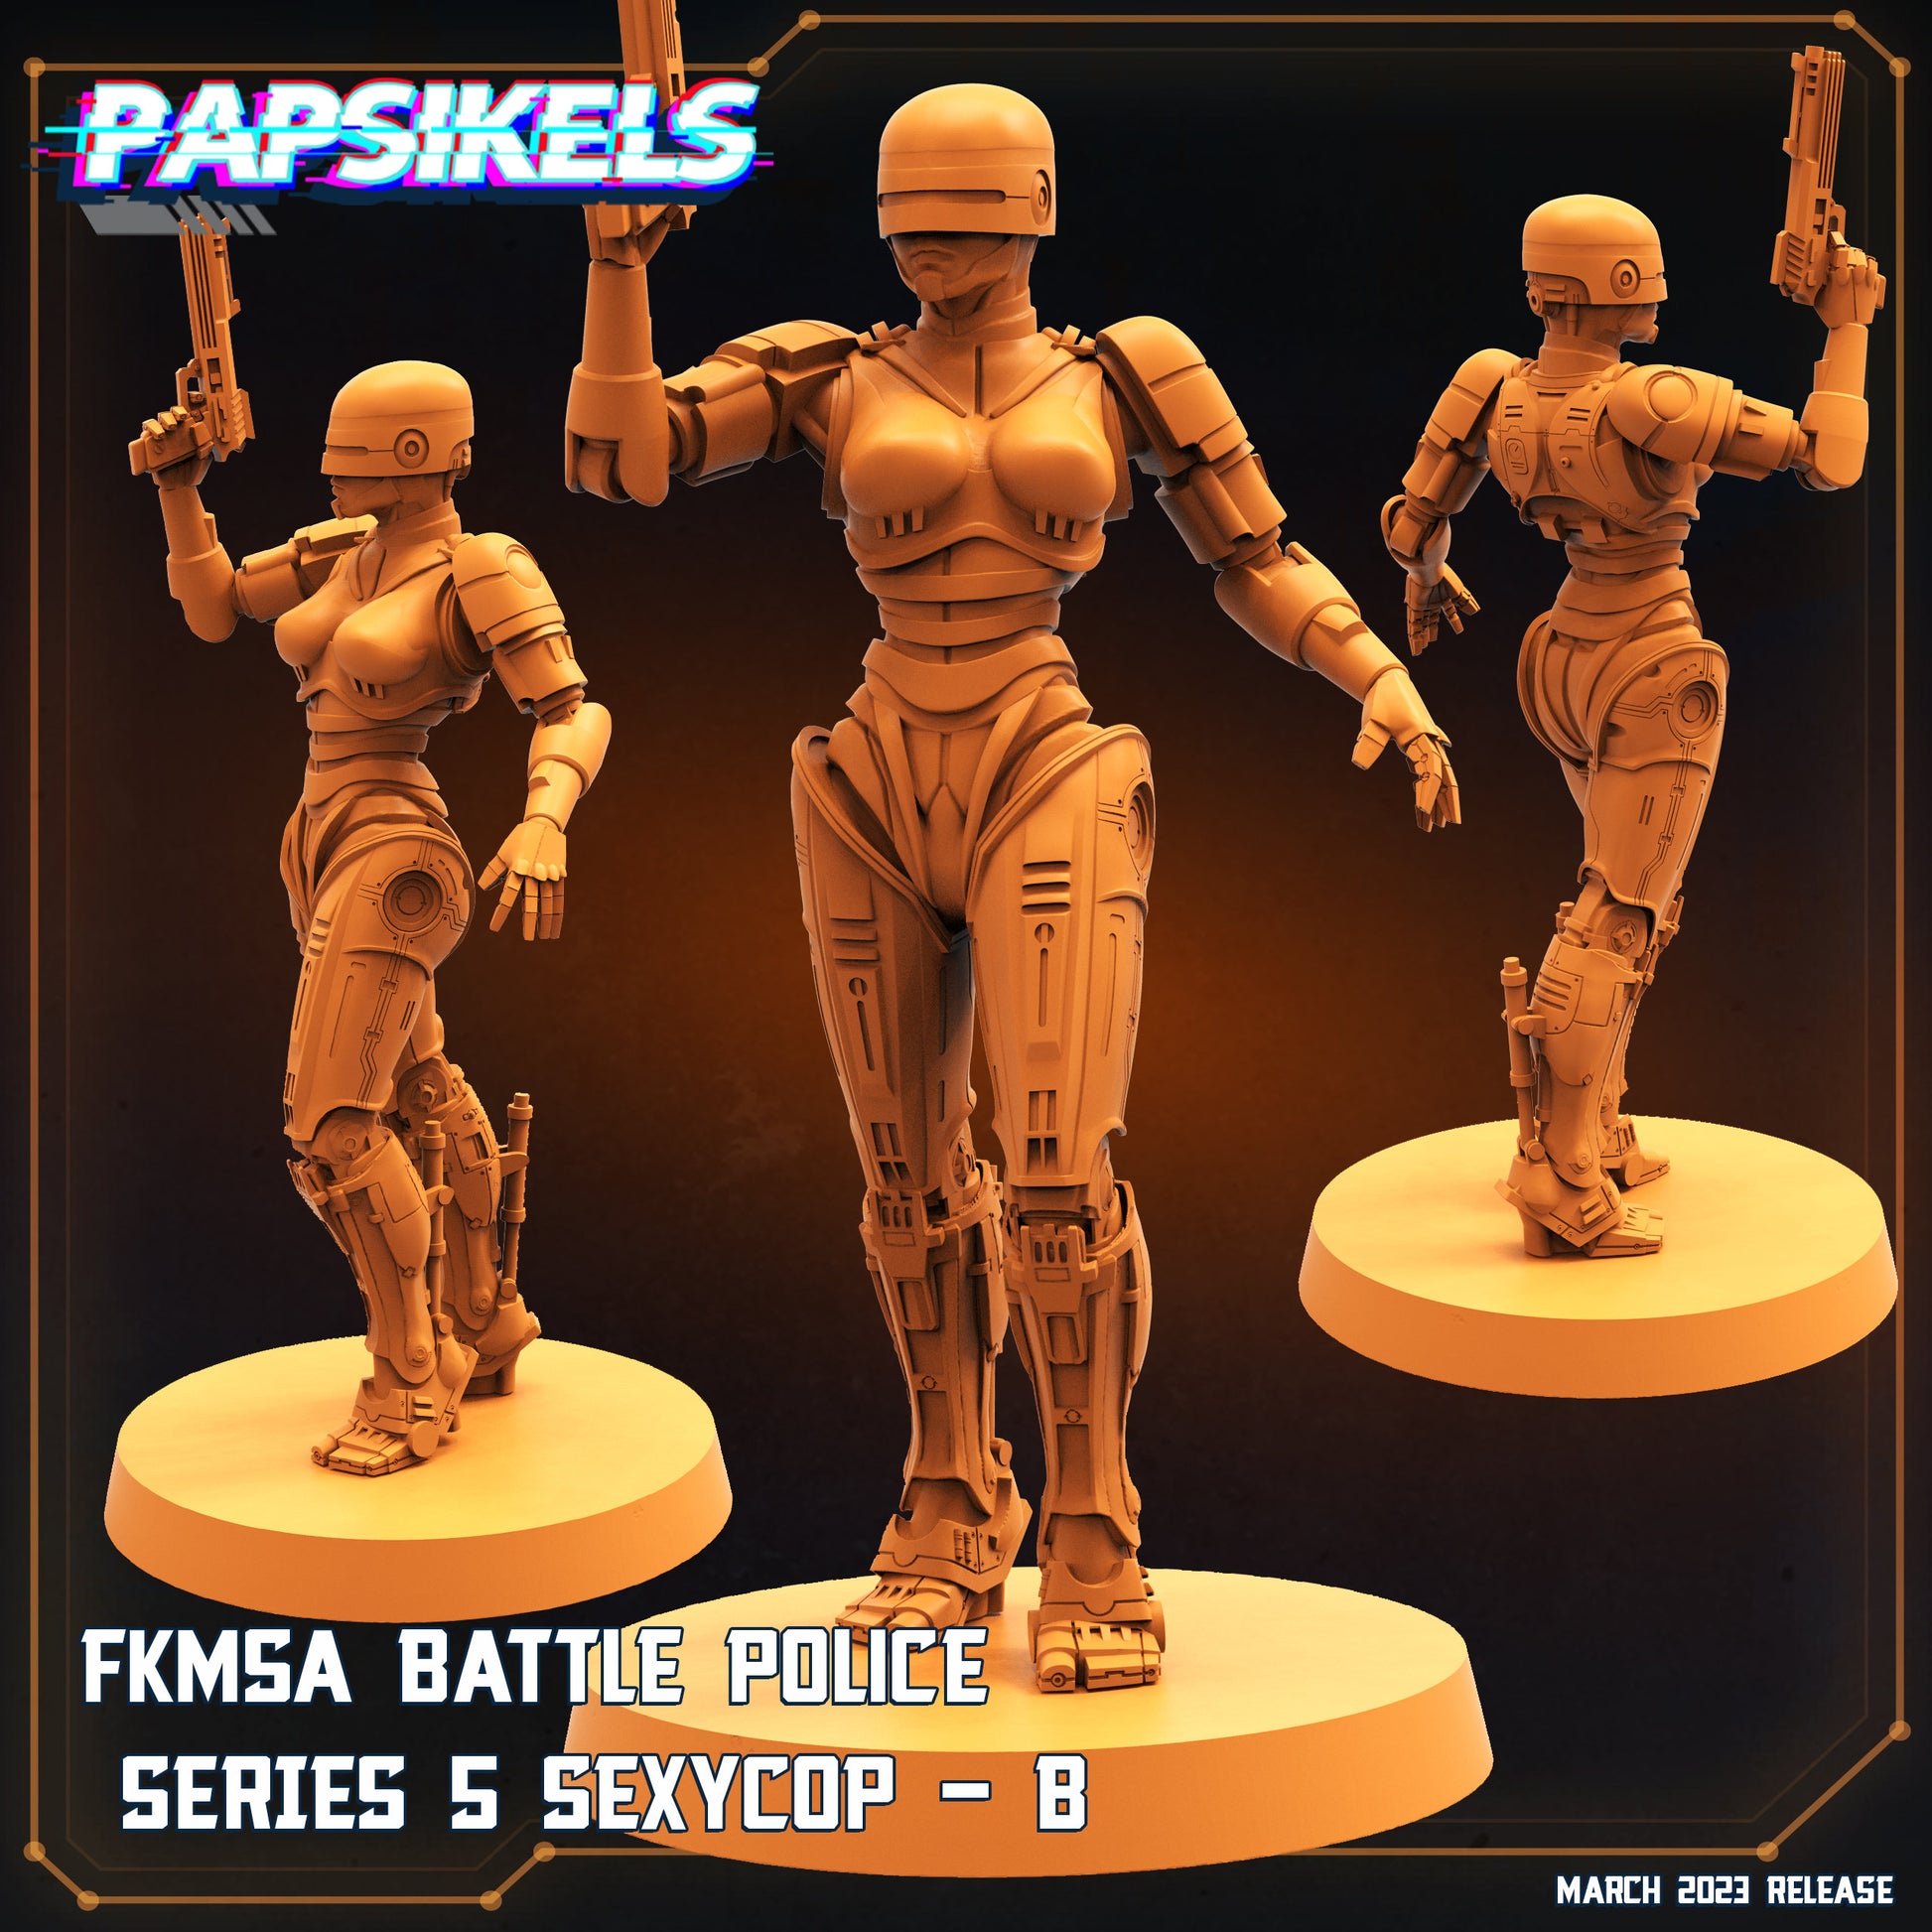 FKSMA Battle Police - Series 5 Sexycop B (sculpted by Papsikels)